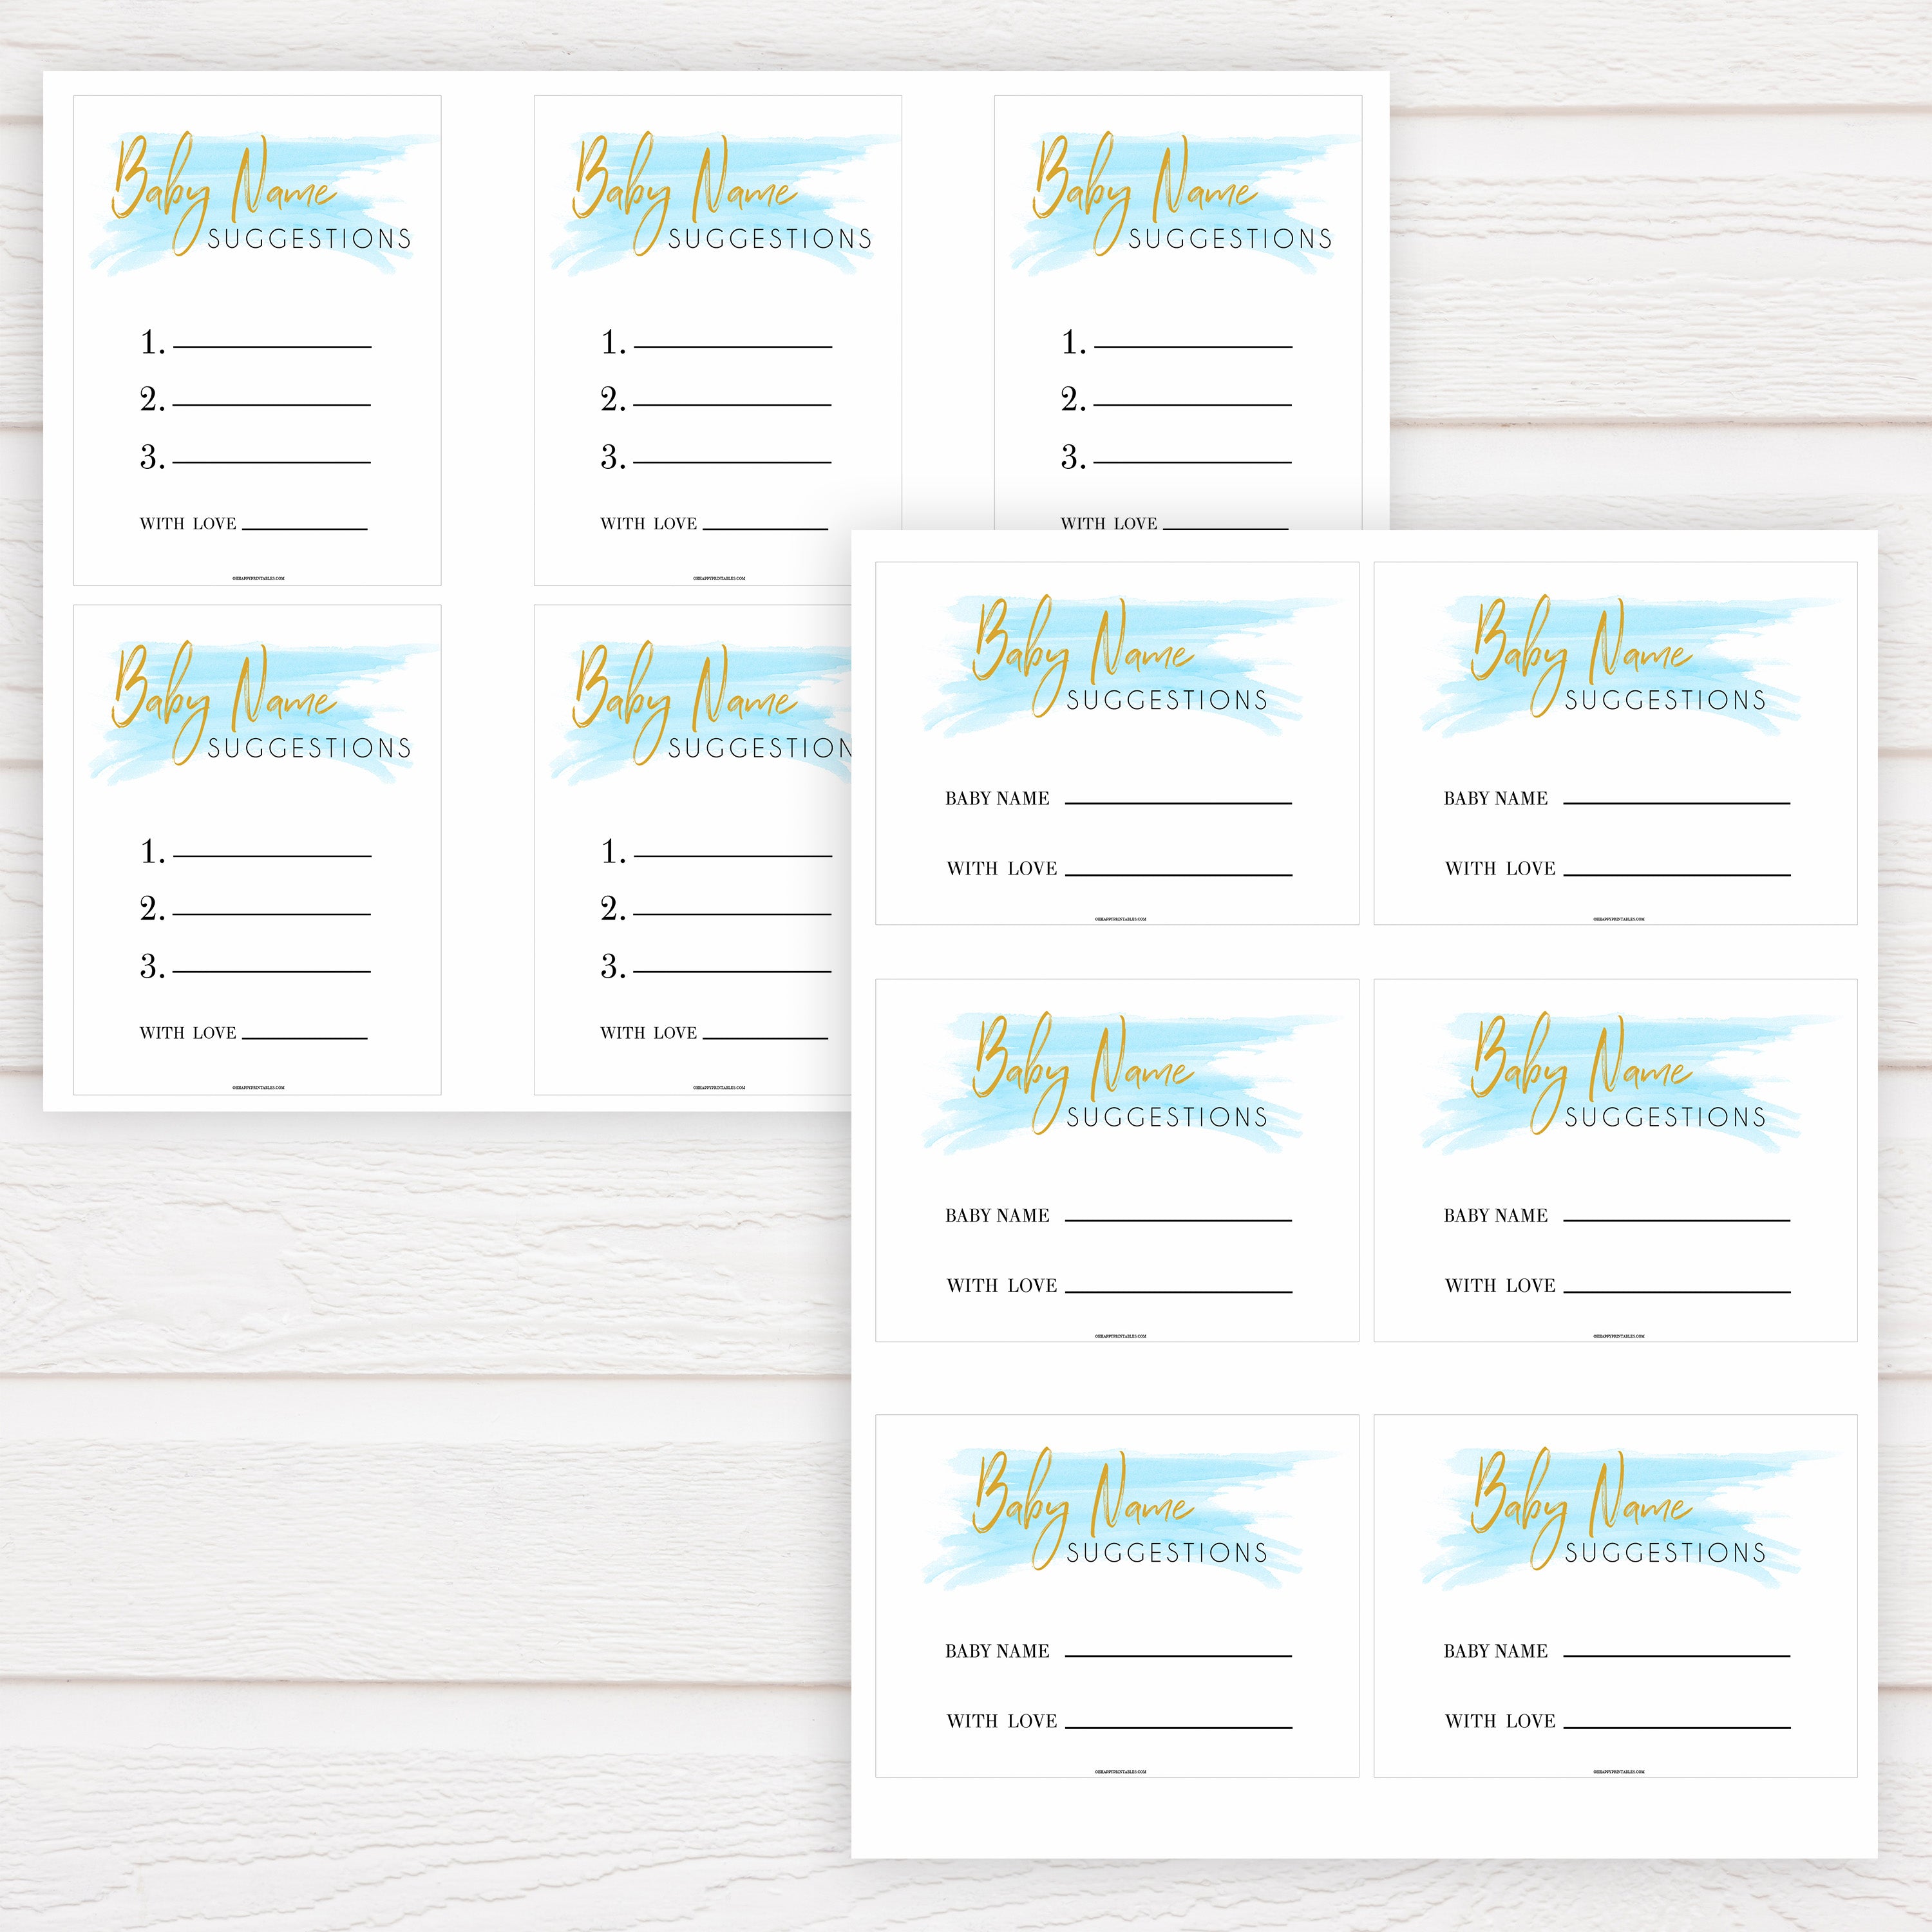 Blue swash, baby name suggestions baby games, baby shower games, printable baby games, fun baby games, boy baby shower games, baby games, fun baby shower ideas, baby shower ideas, boy baby games, blue baby shower